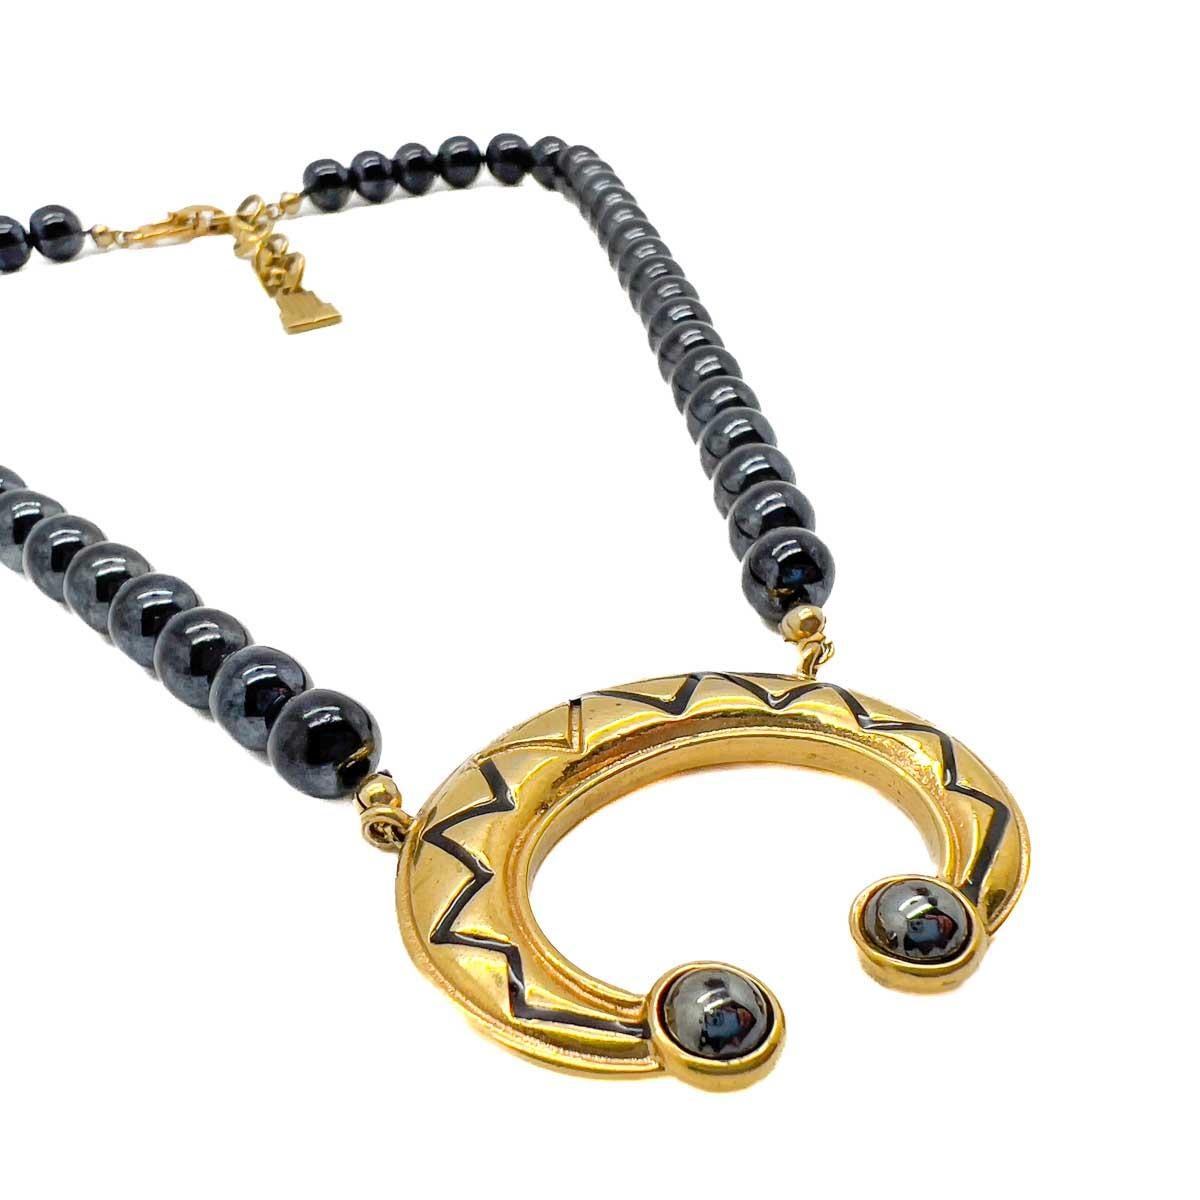 A Vintage Lanvin Crescent Necklace. Centred on a classic combination of gold and black this embellished Lanvin crescent represents all things feminine and creative. A perfect talisman from the House.
Jeanne-Marie Lanvin, 20th Century milliner turned